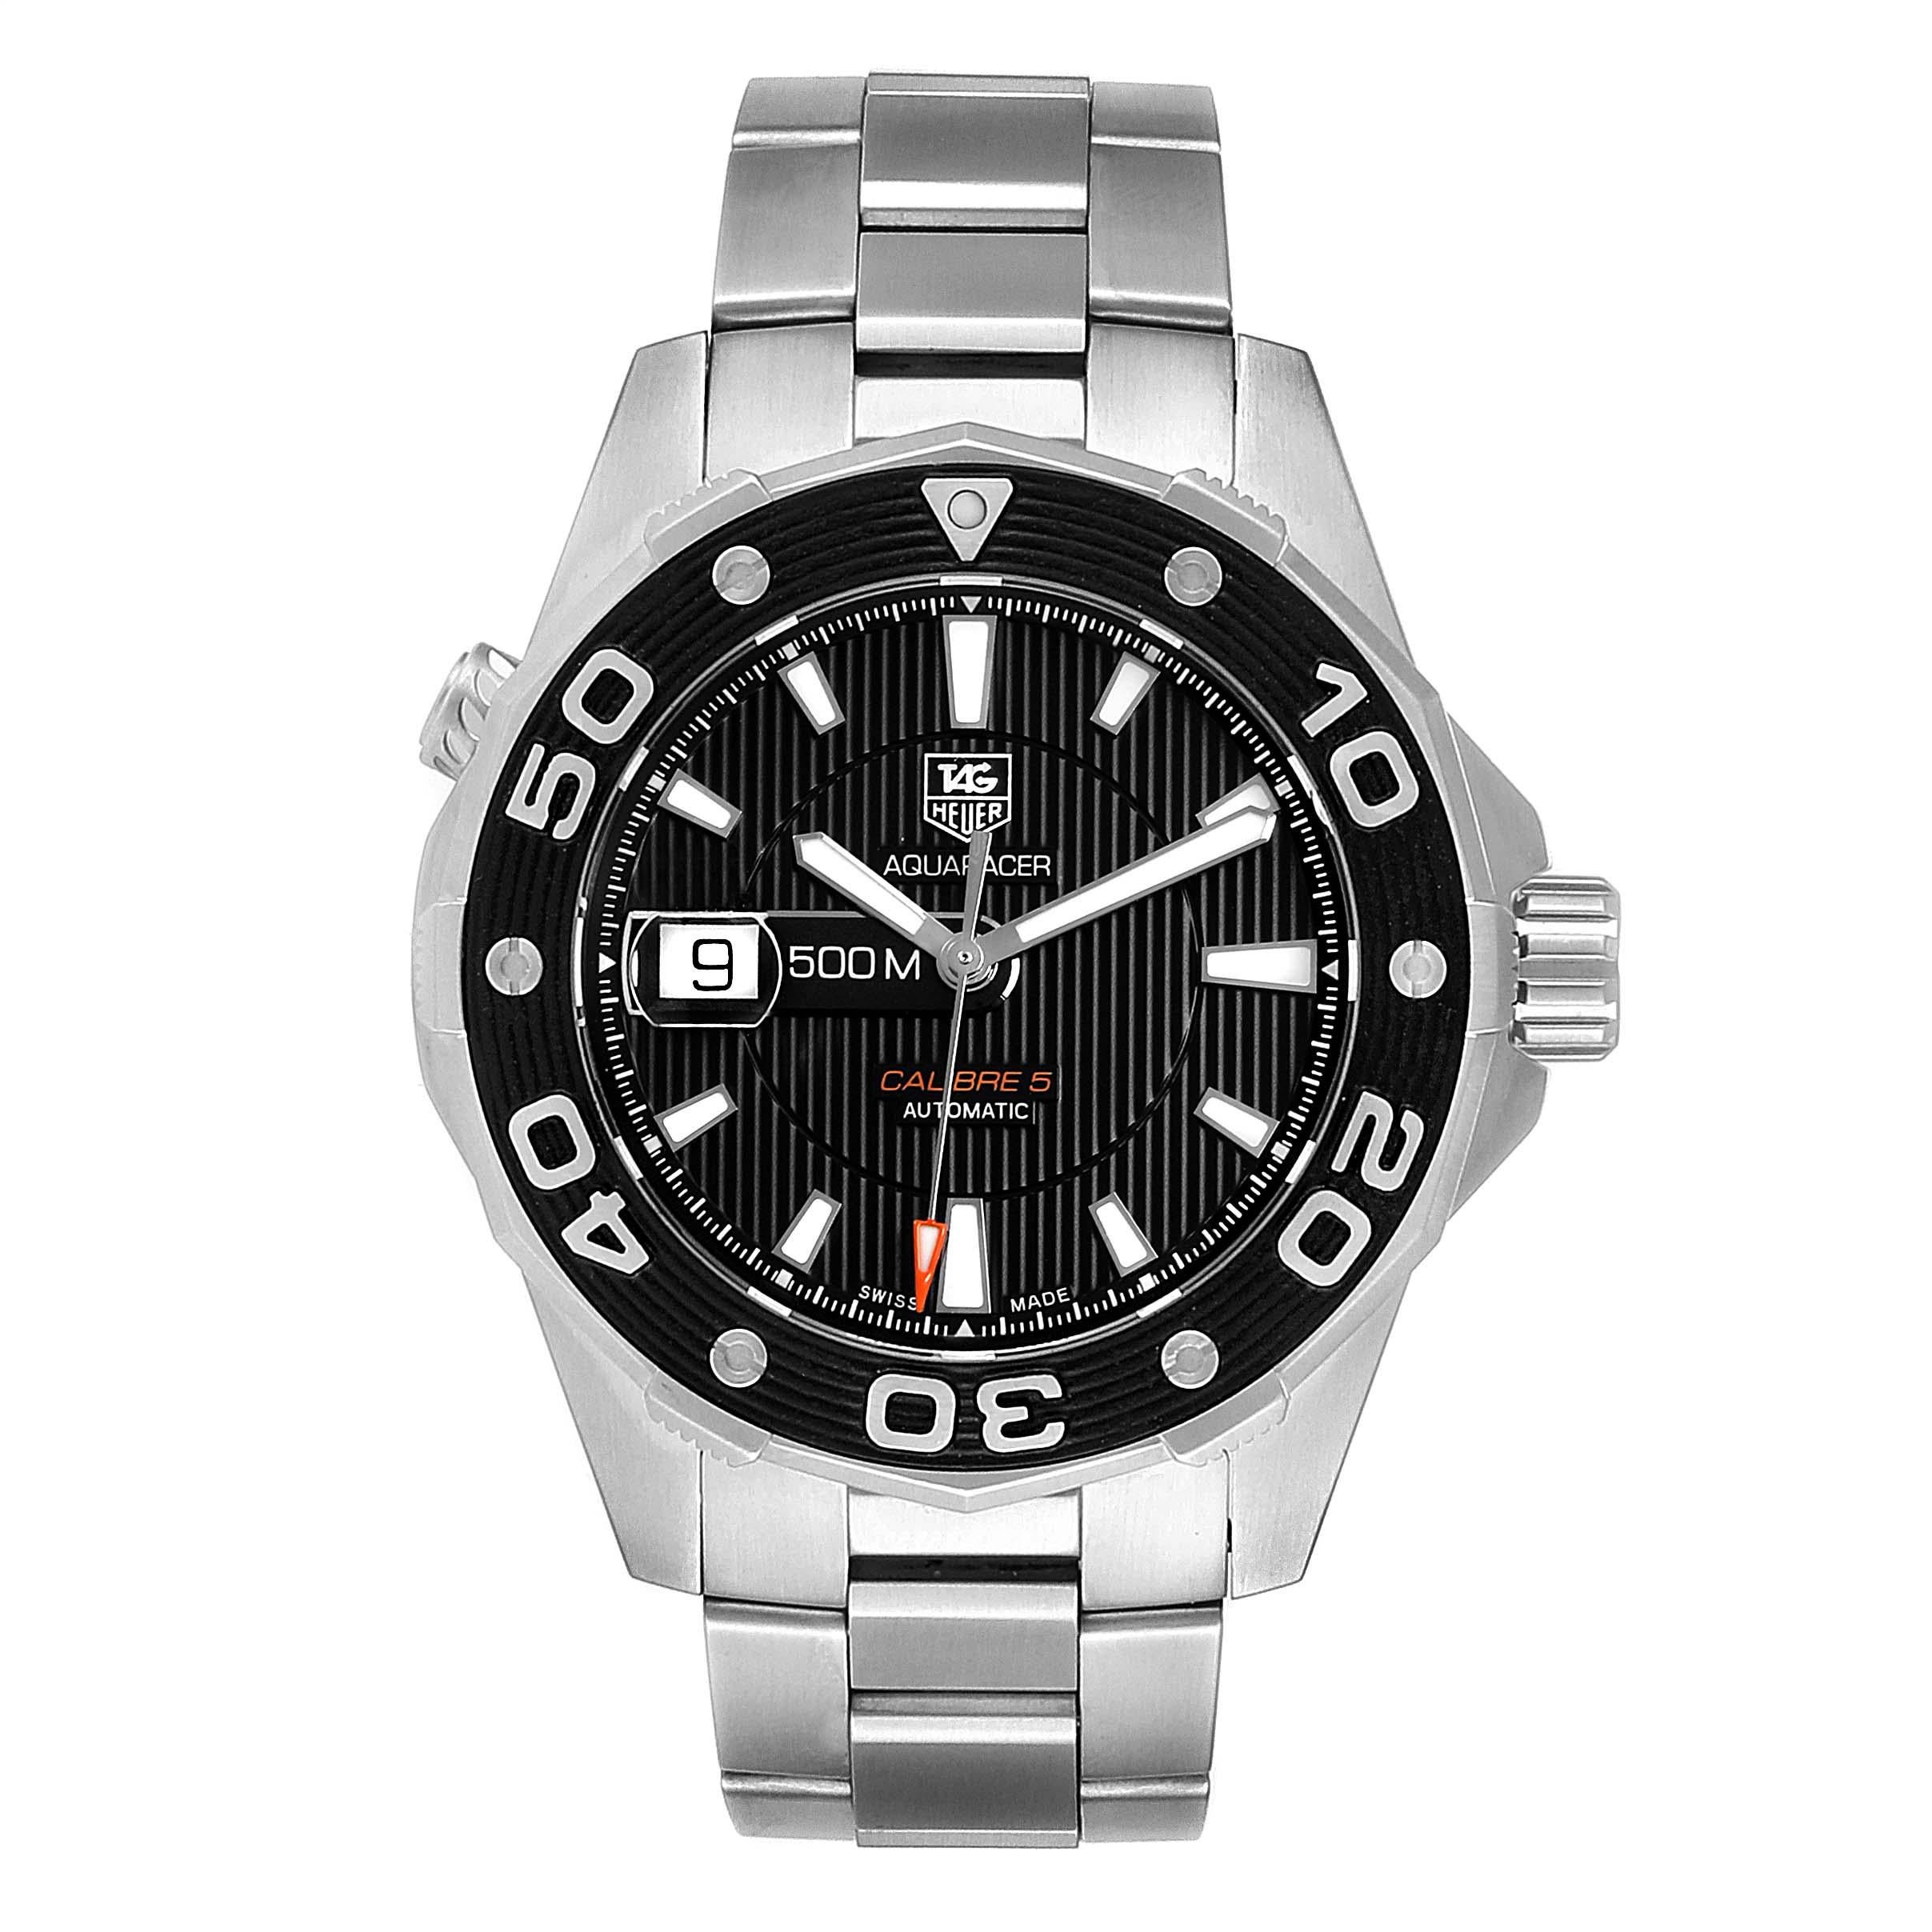 Tag Heuer Aquaracer Calibre 5 500M Steel Mens Watch WAJ2110. Automatic self-winding movement. Stainless steel case 43.0 mm in diameter. Unidirectional rotating bezel. Scratch resistant sapphire crystal. Black dial with luminous hands and index hour